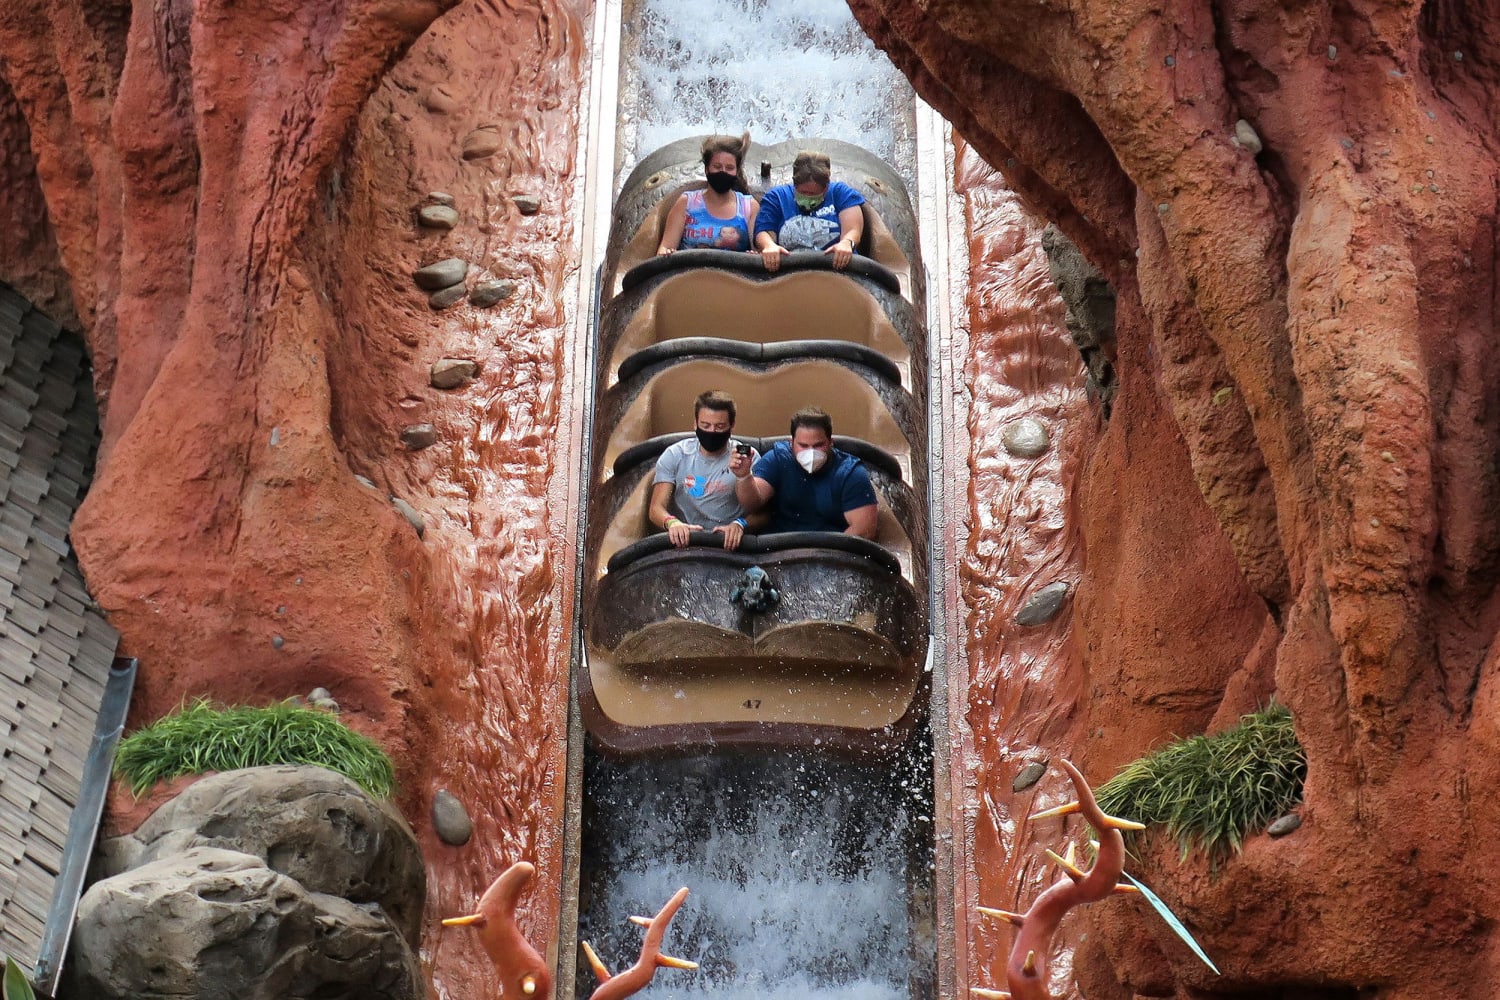 Disney World closed Splash Mountain after allegations of racism. Not  everyone's happy.